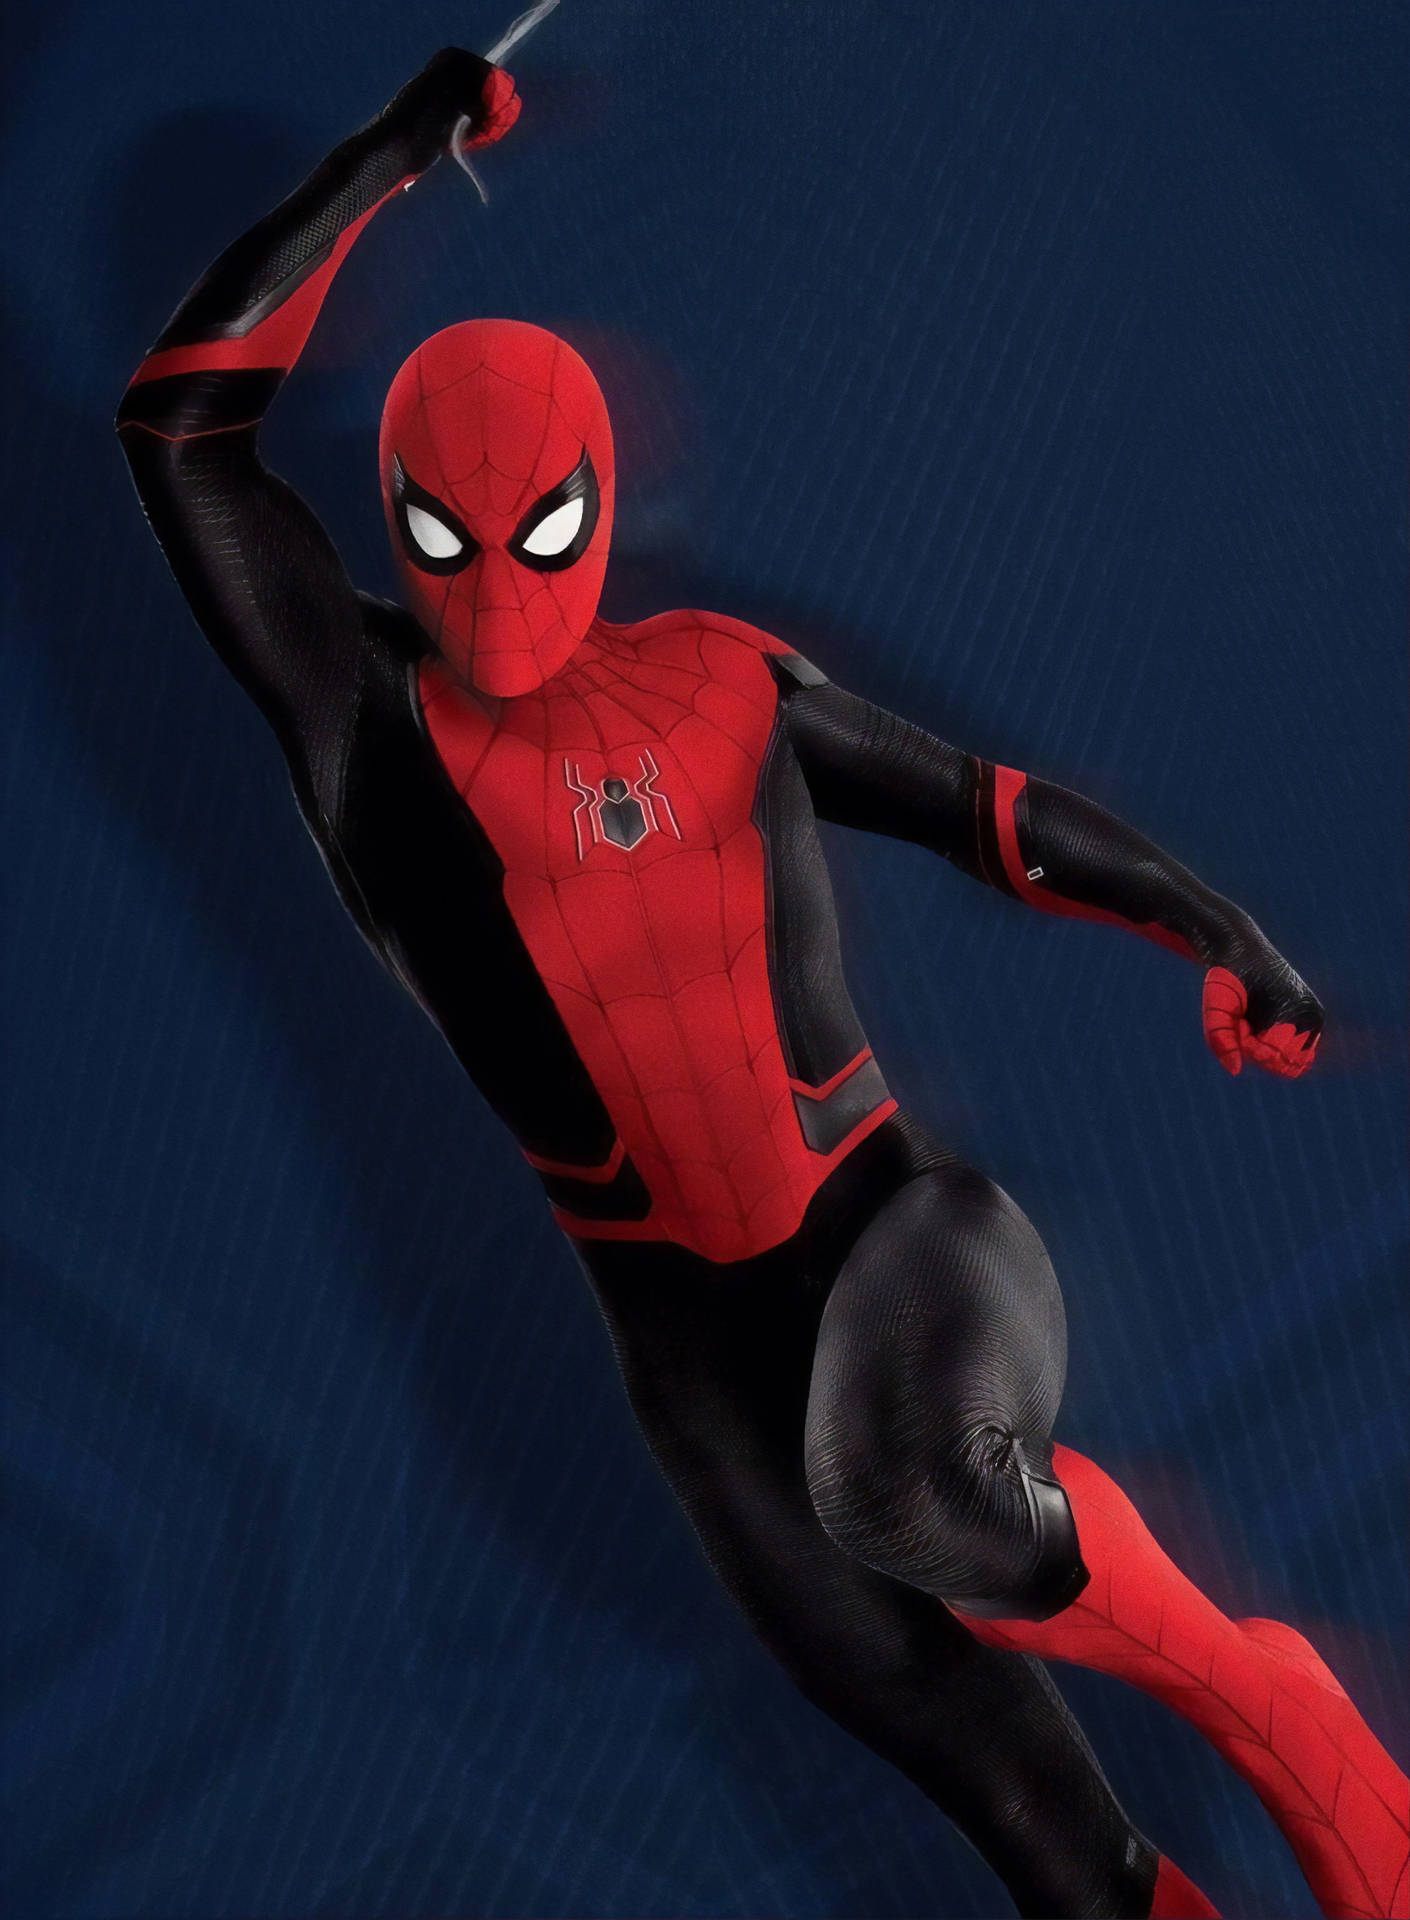 Hanging Spider Man Far From Home 2019 Wallpaper